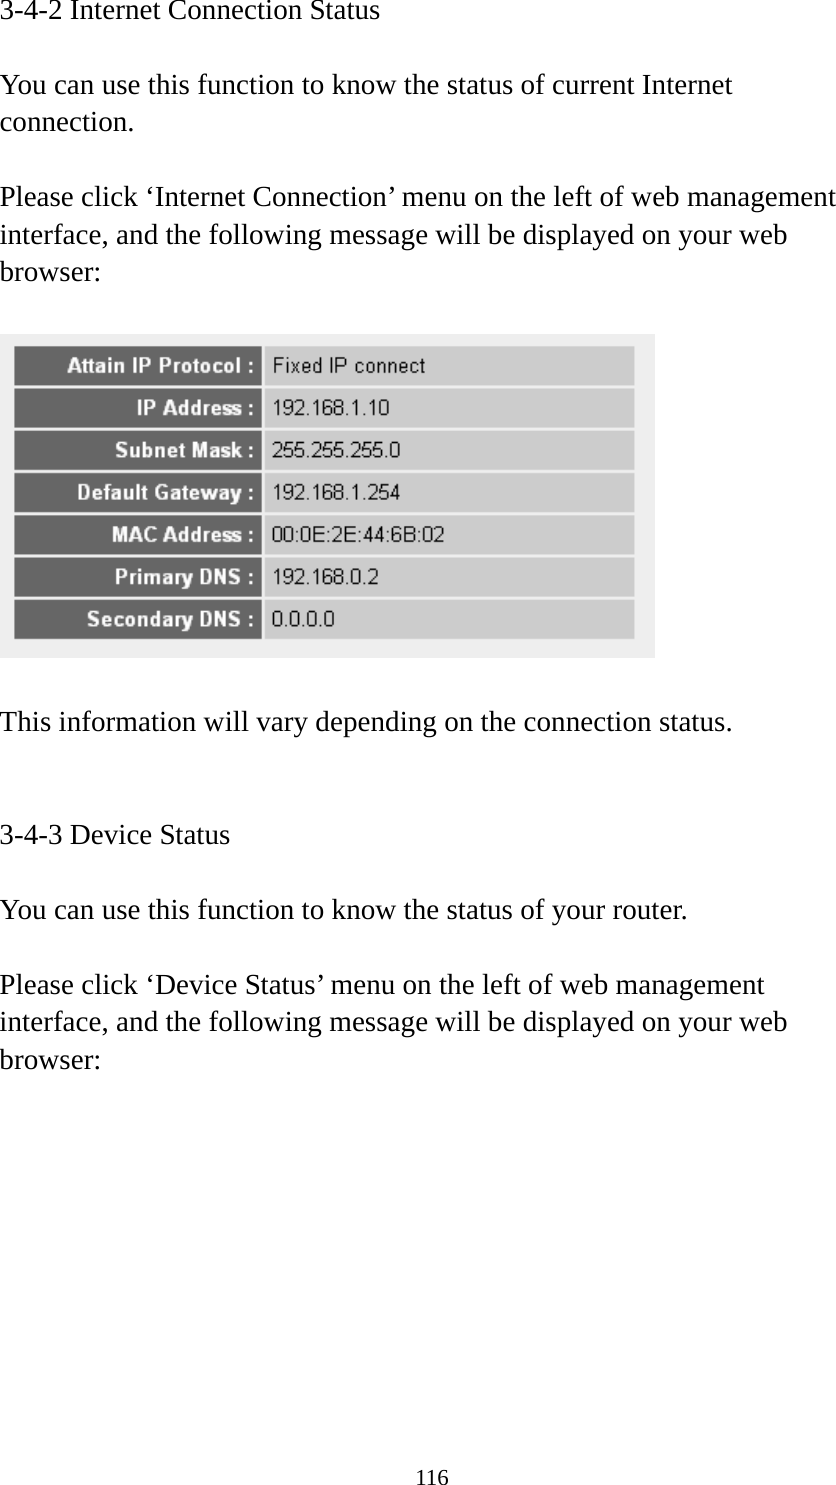 116 3-4-2 Internet Connection Status  You can use this function to know the status of current Internet connection.  Please click ‘Internet Connection’ menu on the left of web management interface, and the following message will be displayed on your web browser:    This information will vary depending on the connection status.   3-4-3 Device Status  You can use this function to know the status of your router.  Please click ‘Device Status’ menu on the left of web management interface, and the following message will be displayed on your web browser:  